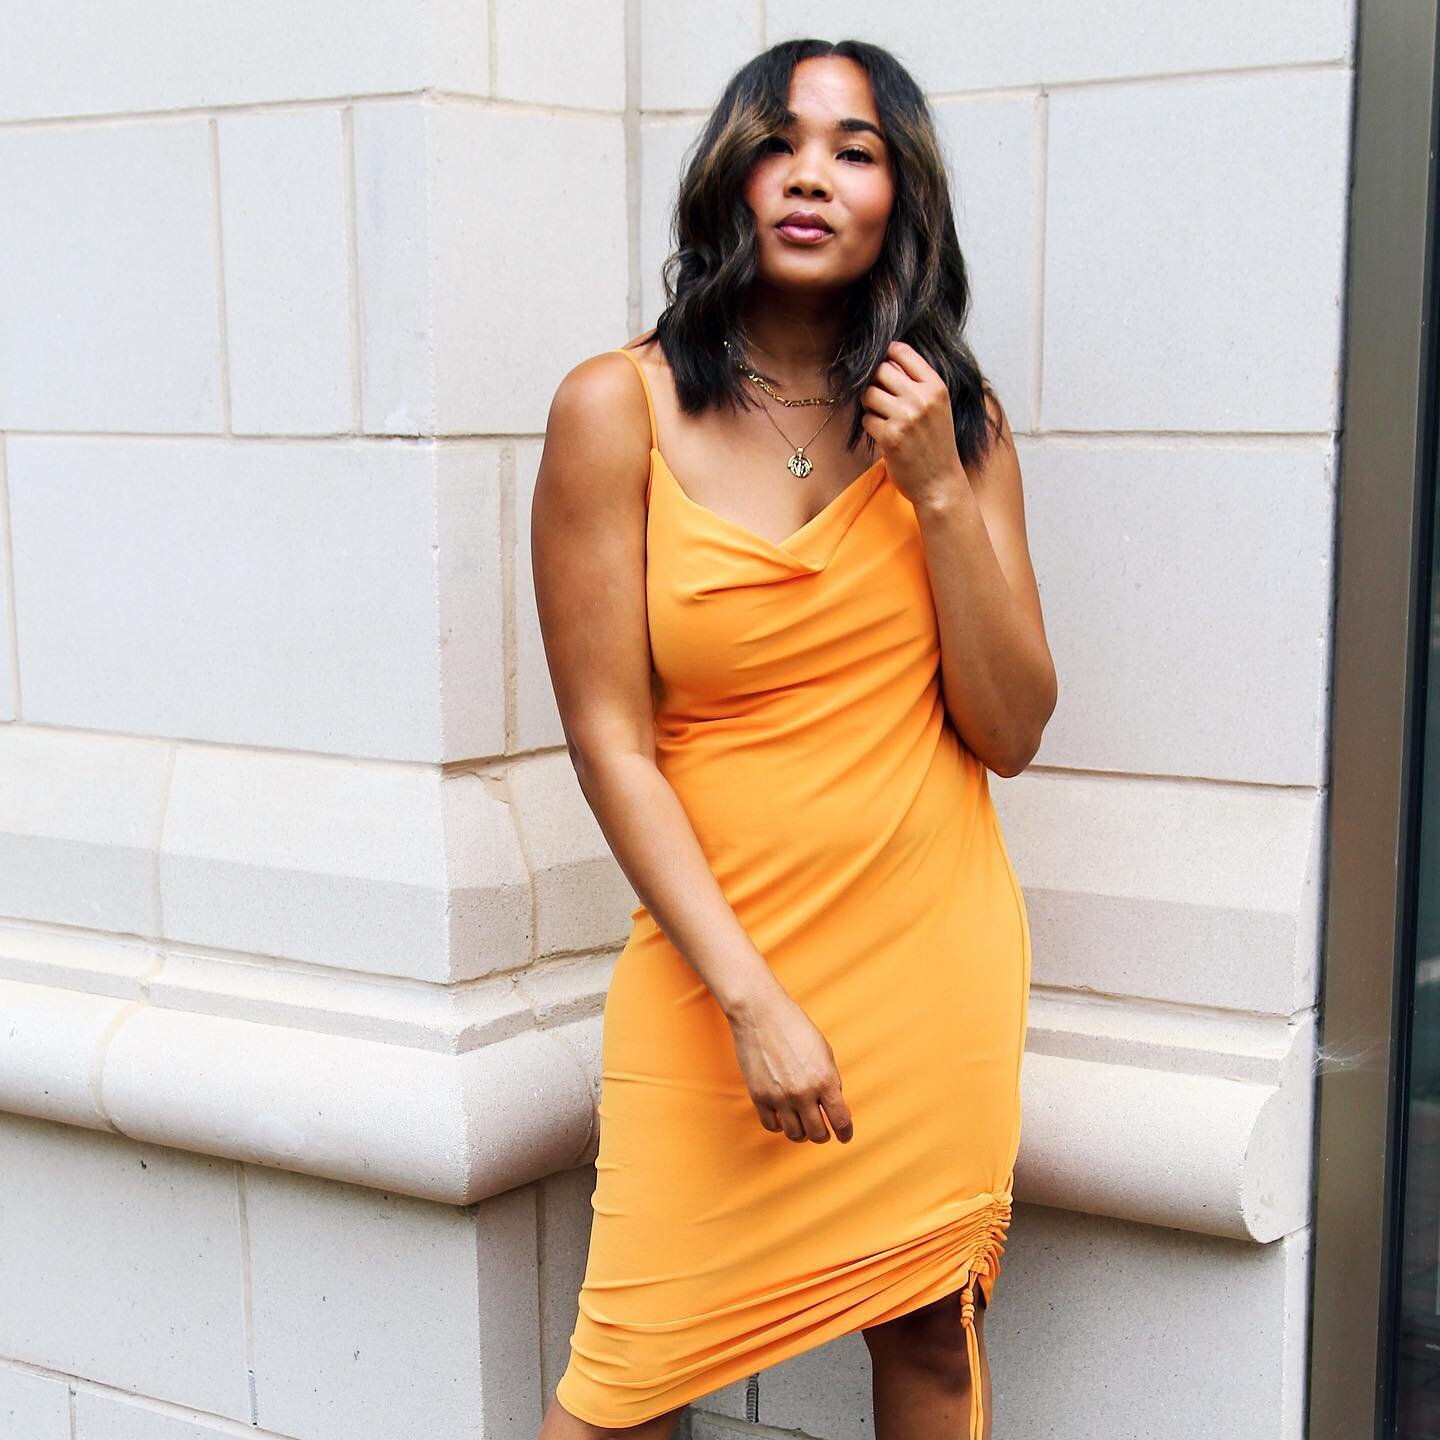 O R A N G E ✨🍊 a color that evokes happiness, warmth, radiance &amp; positivity🙌🏽 I love that color within your wardrobe can make you feel, inspire you, and give you unshakable confidence. sharing more over on the blog. Link in bio! 📷: @adsamuels